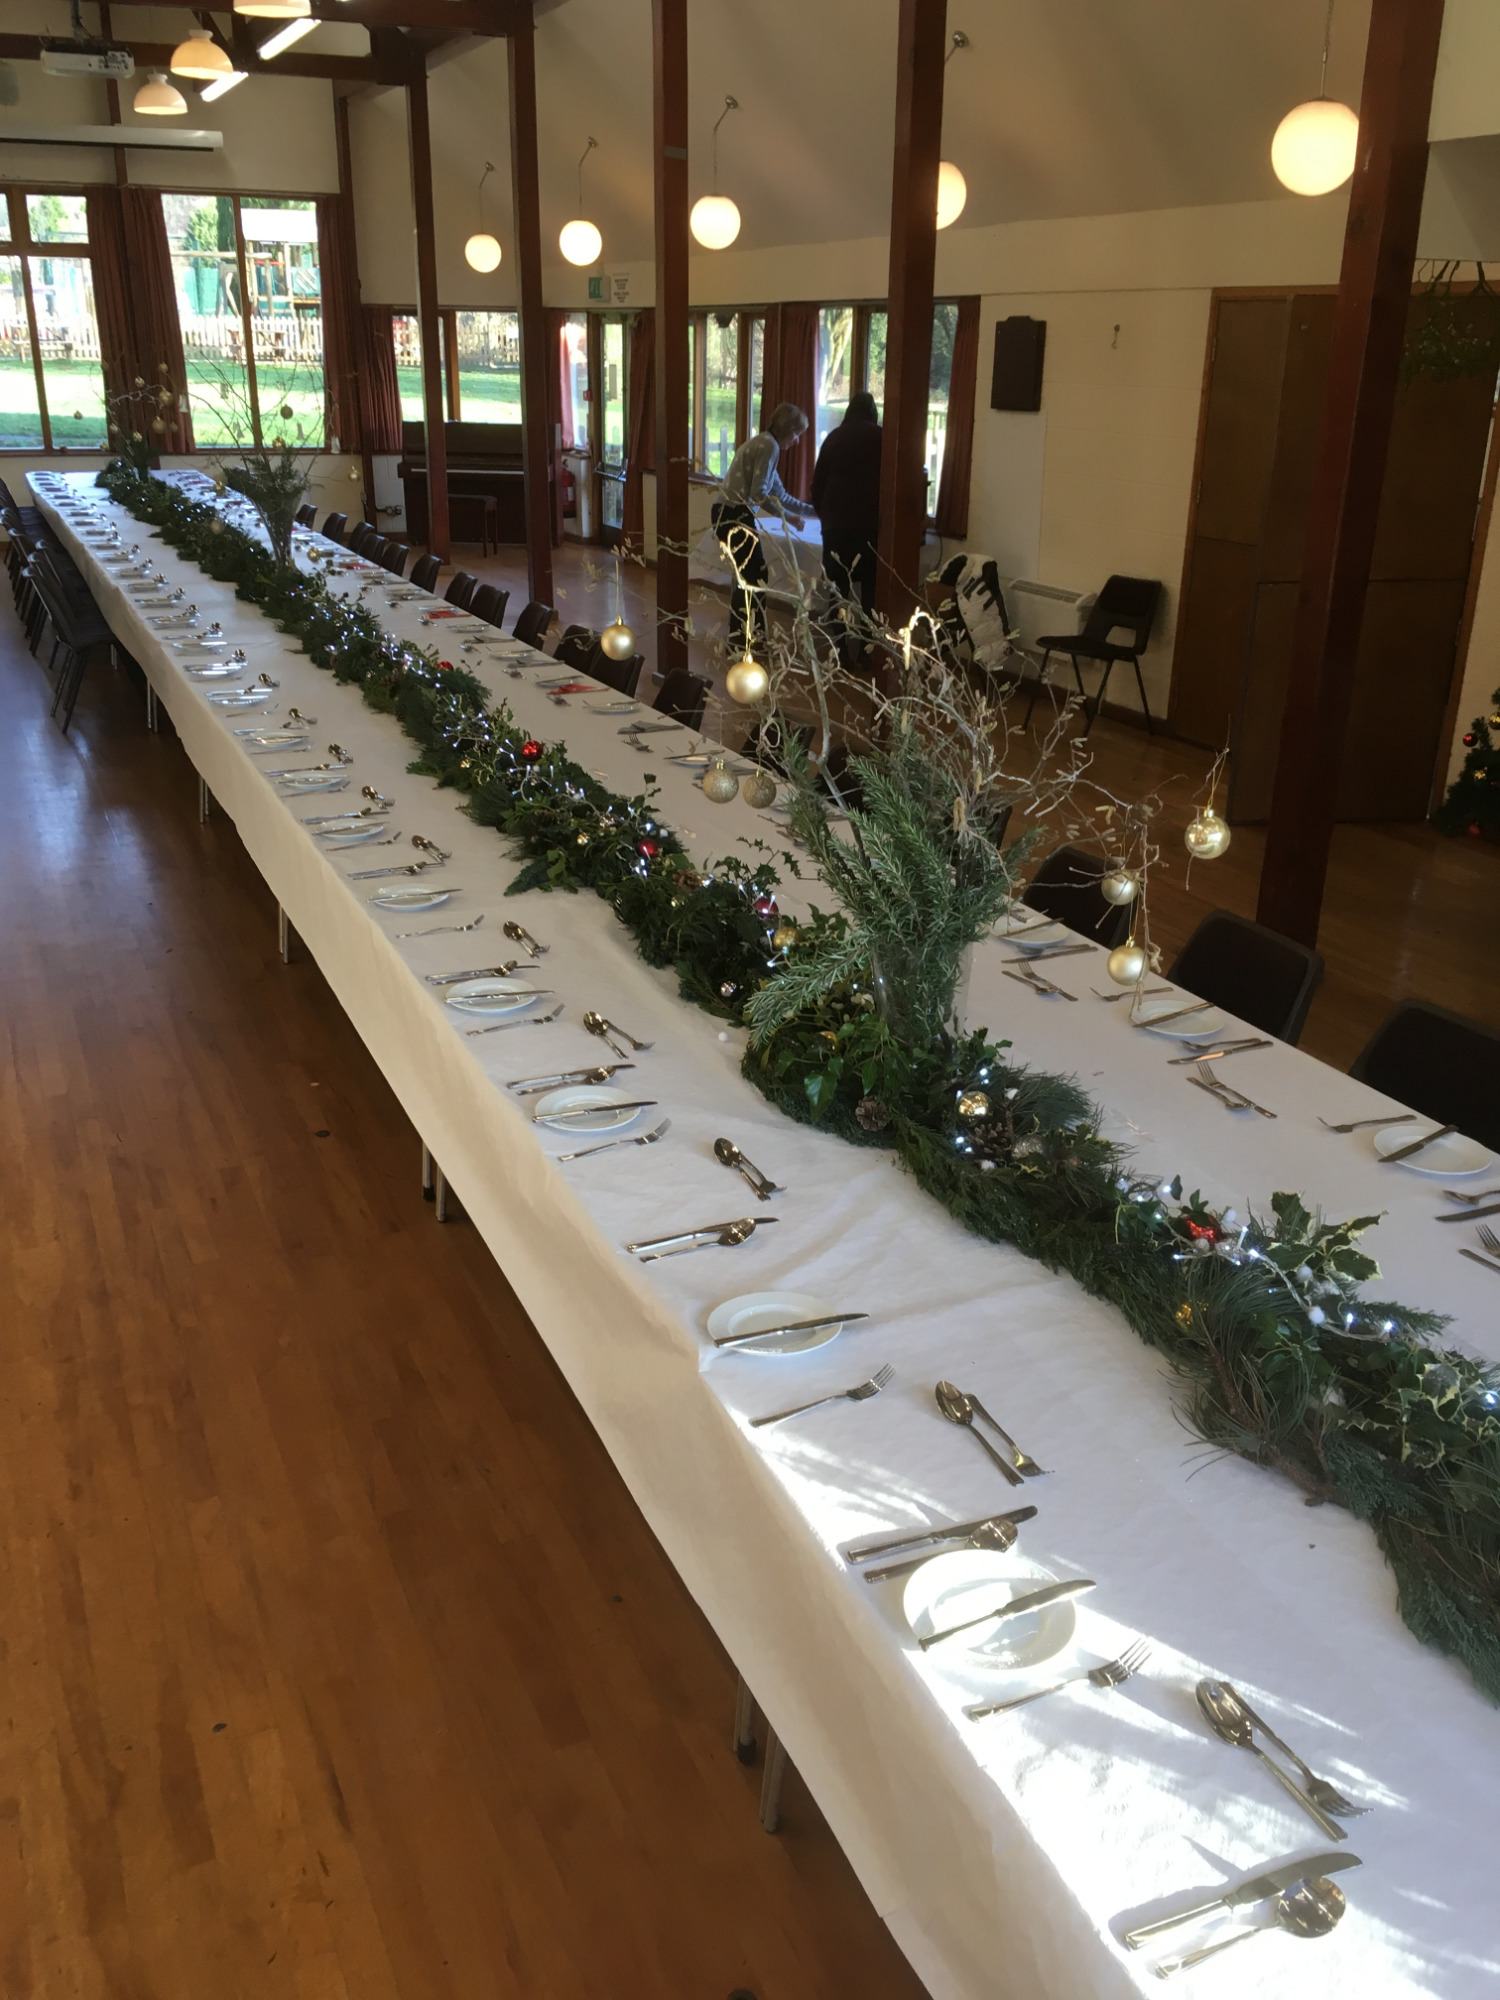 Several tables set up and dressed for the Christmas Meal